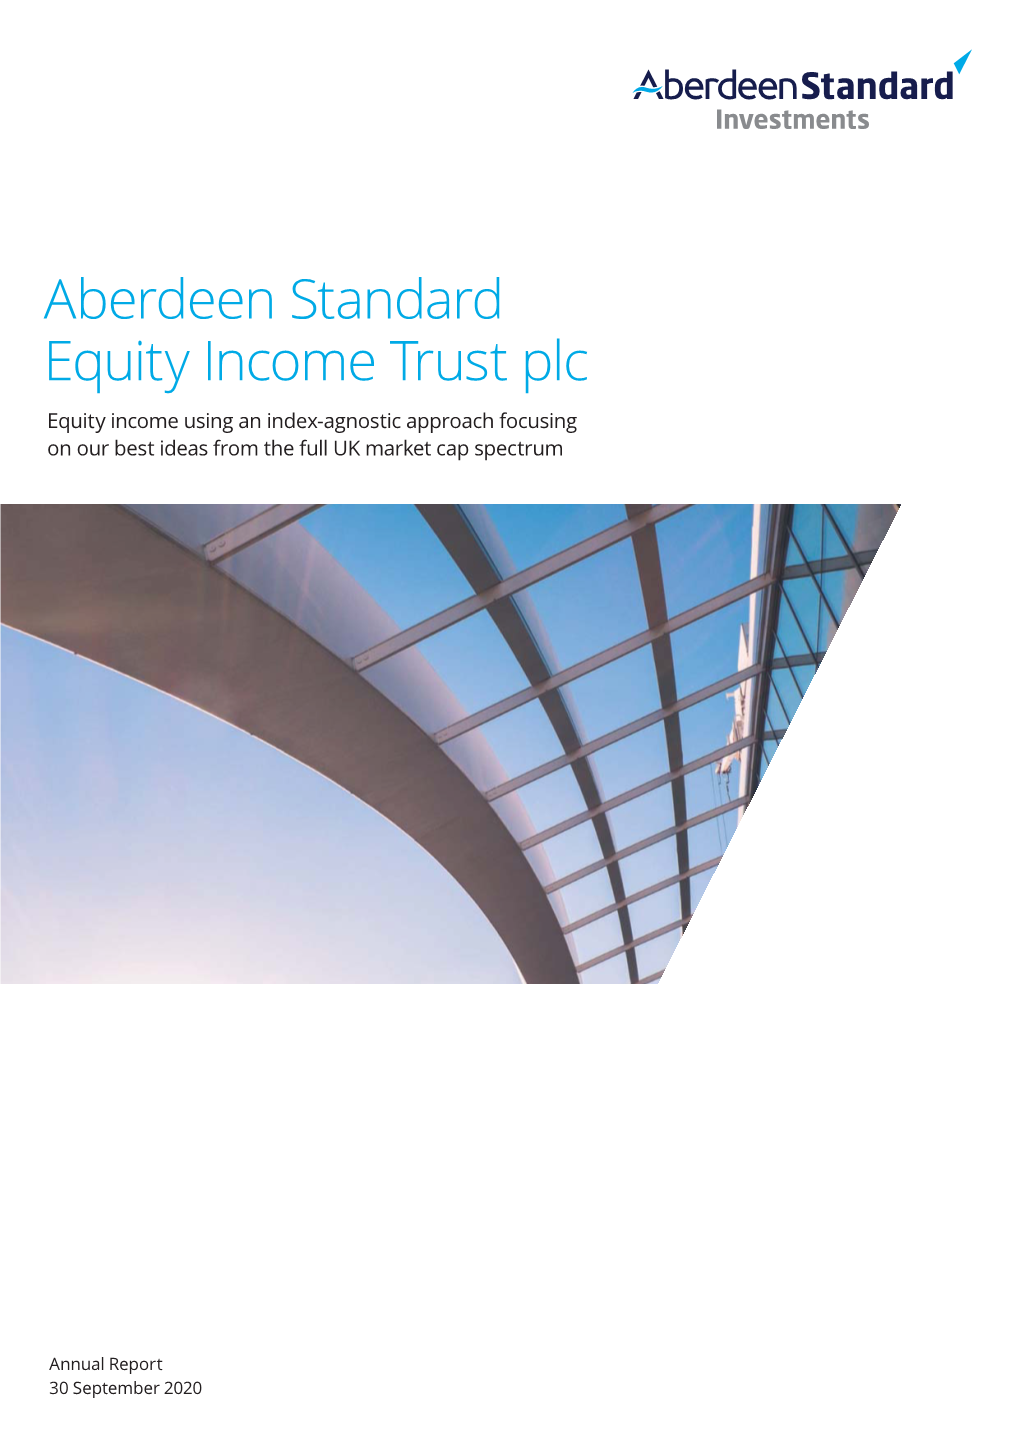 Aberdeen Standard Equity Income Trust Plc Equity Income Using an Index-Agnostic Approach Focusing on Our Best Ideas from the Full UK Market Cap Spectrum